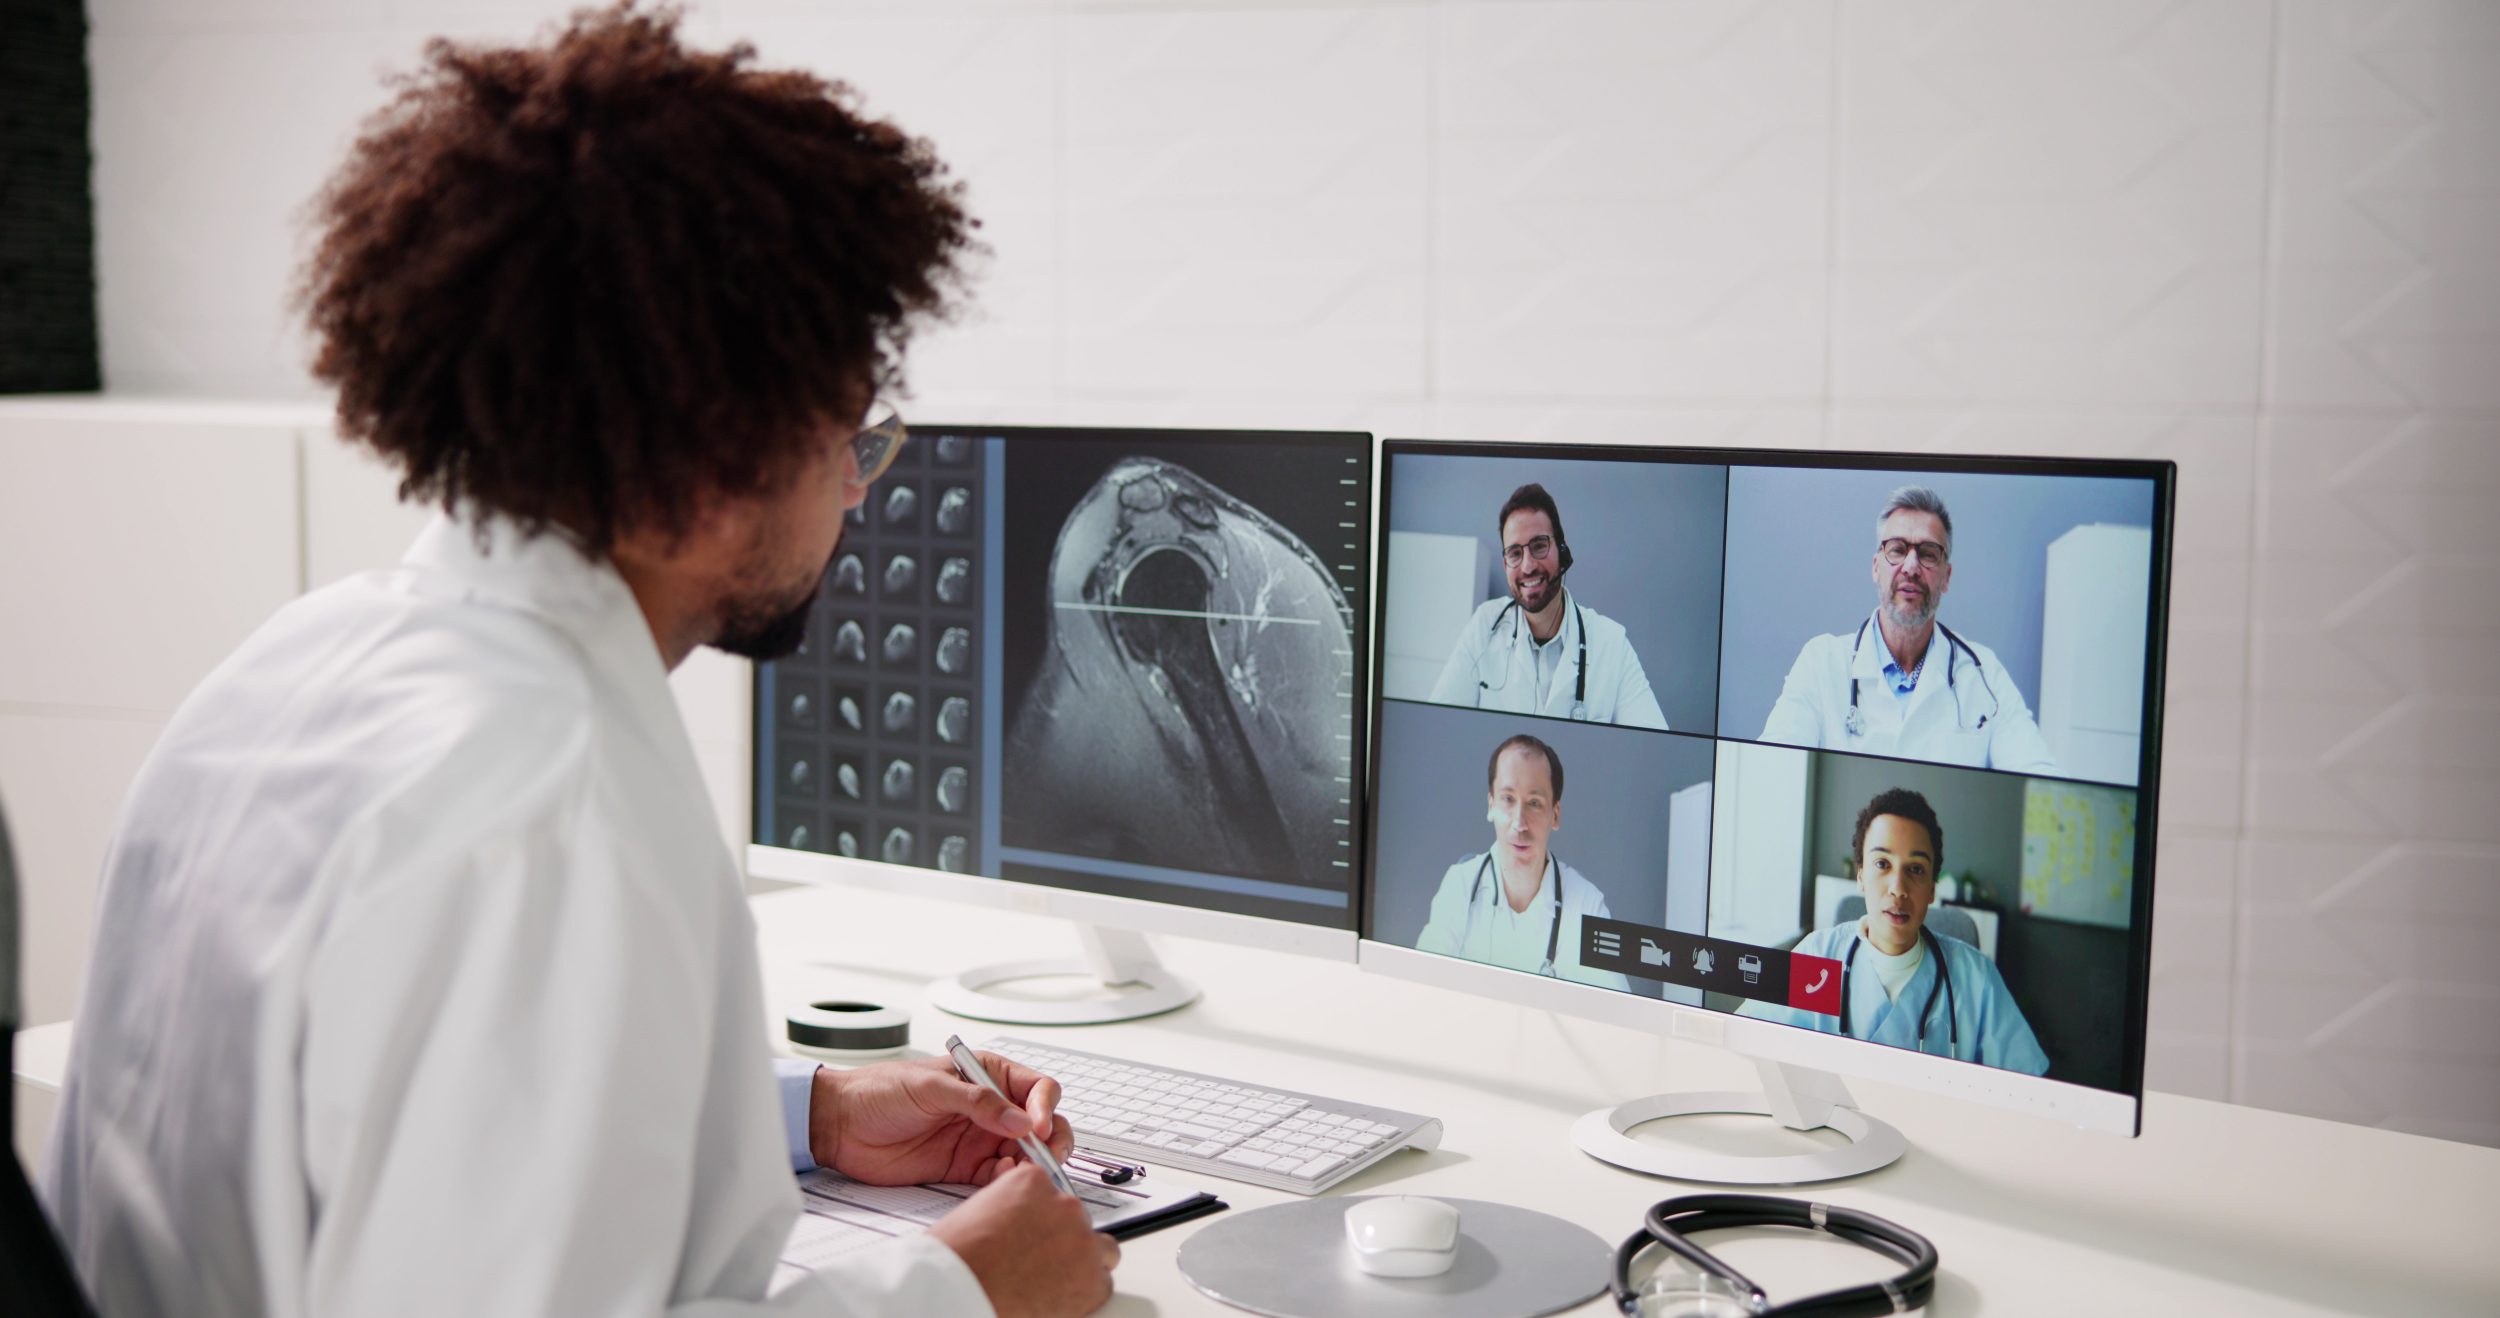 Monitor brightness helps Doctor In Online Video Conference.